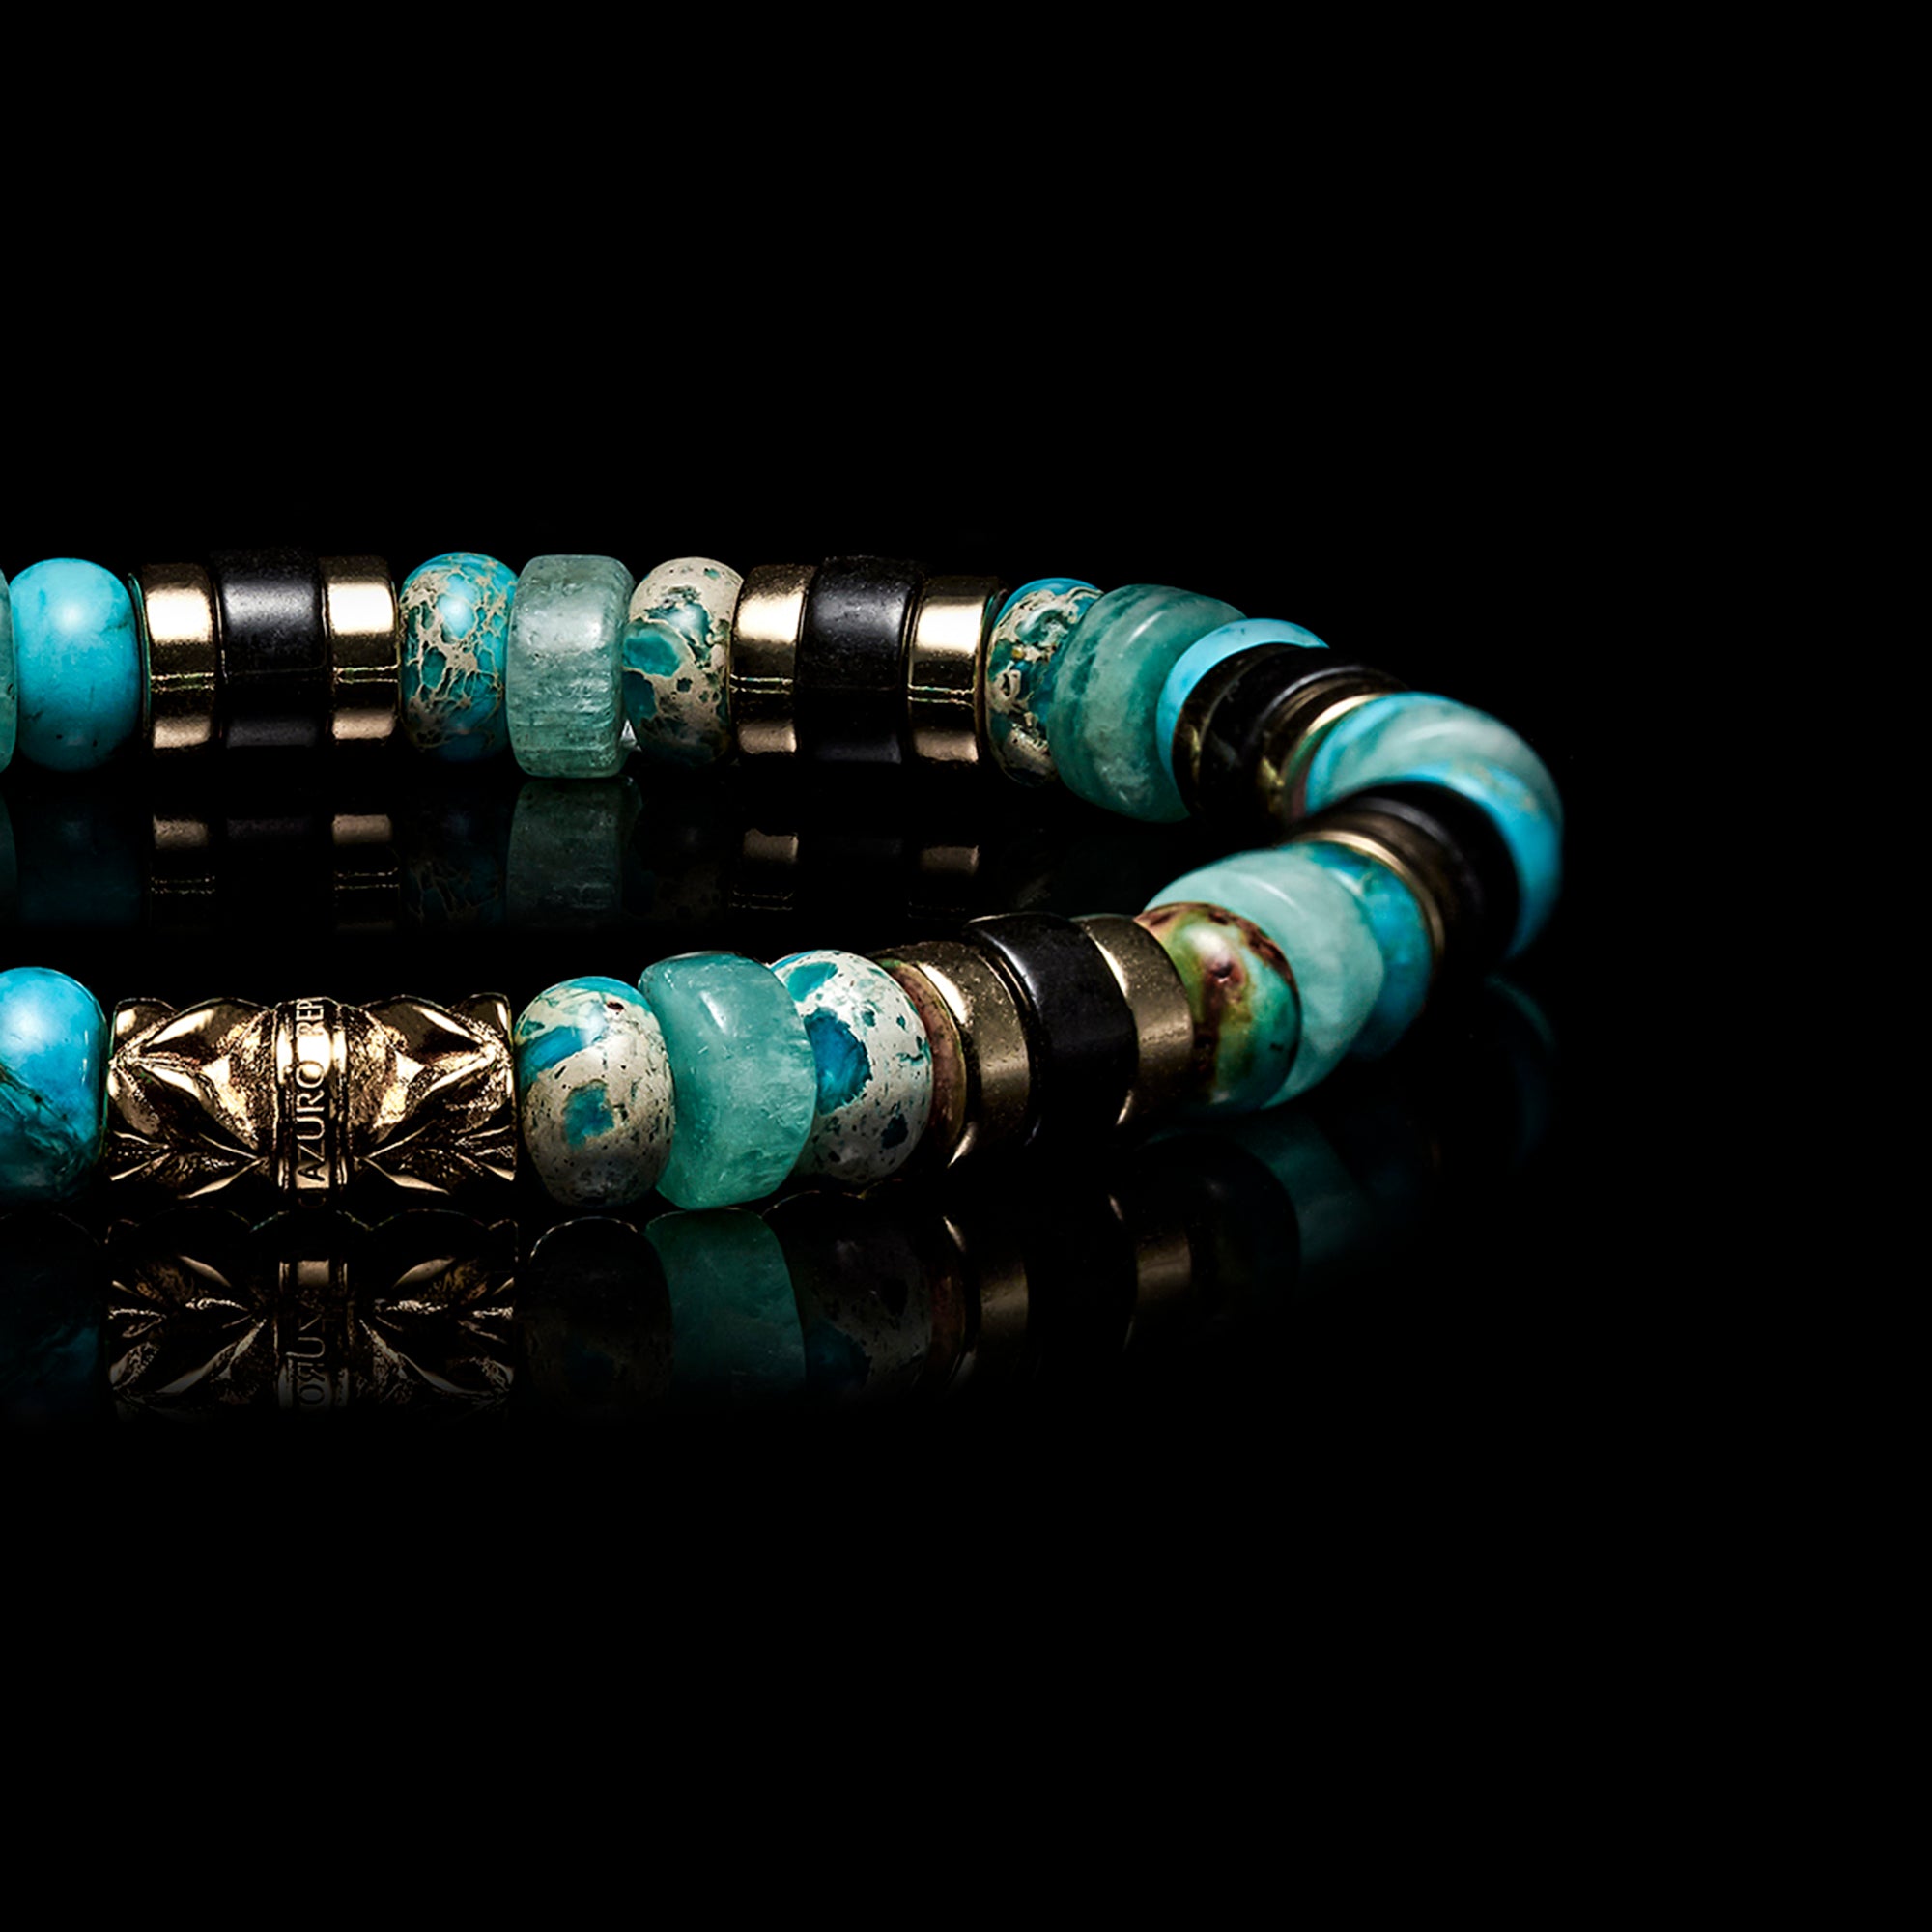 Mens Beach Bracelet with Palm Wood Beads and Turquoise Color